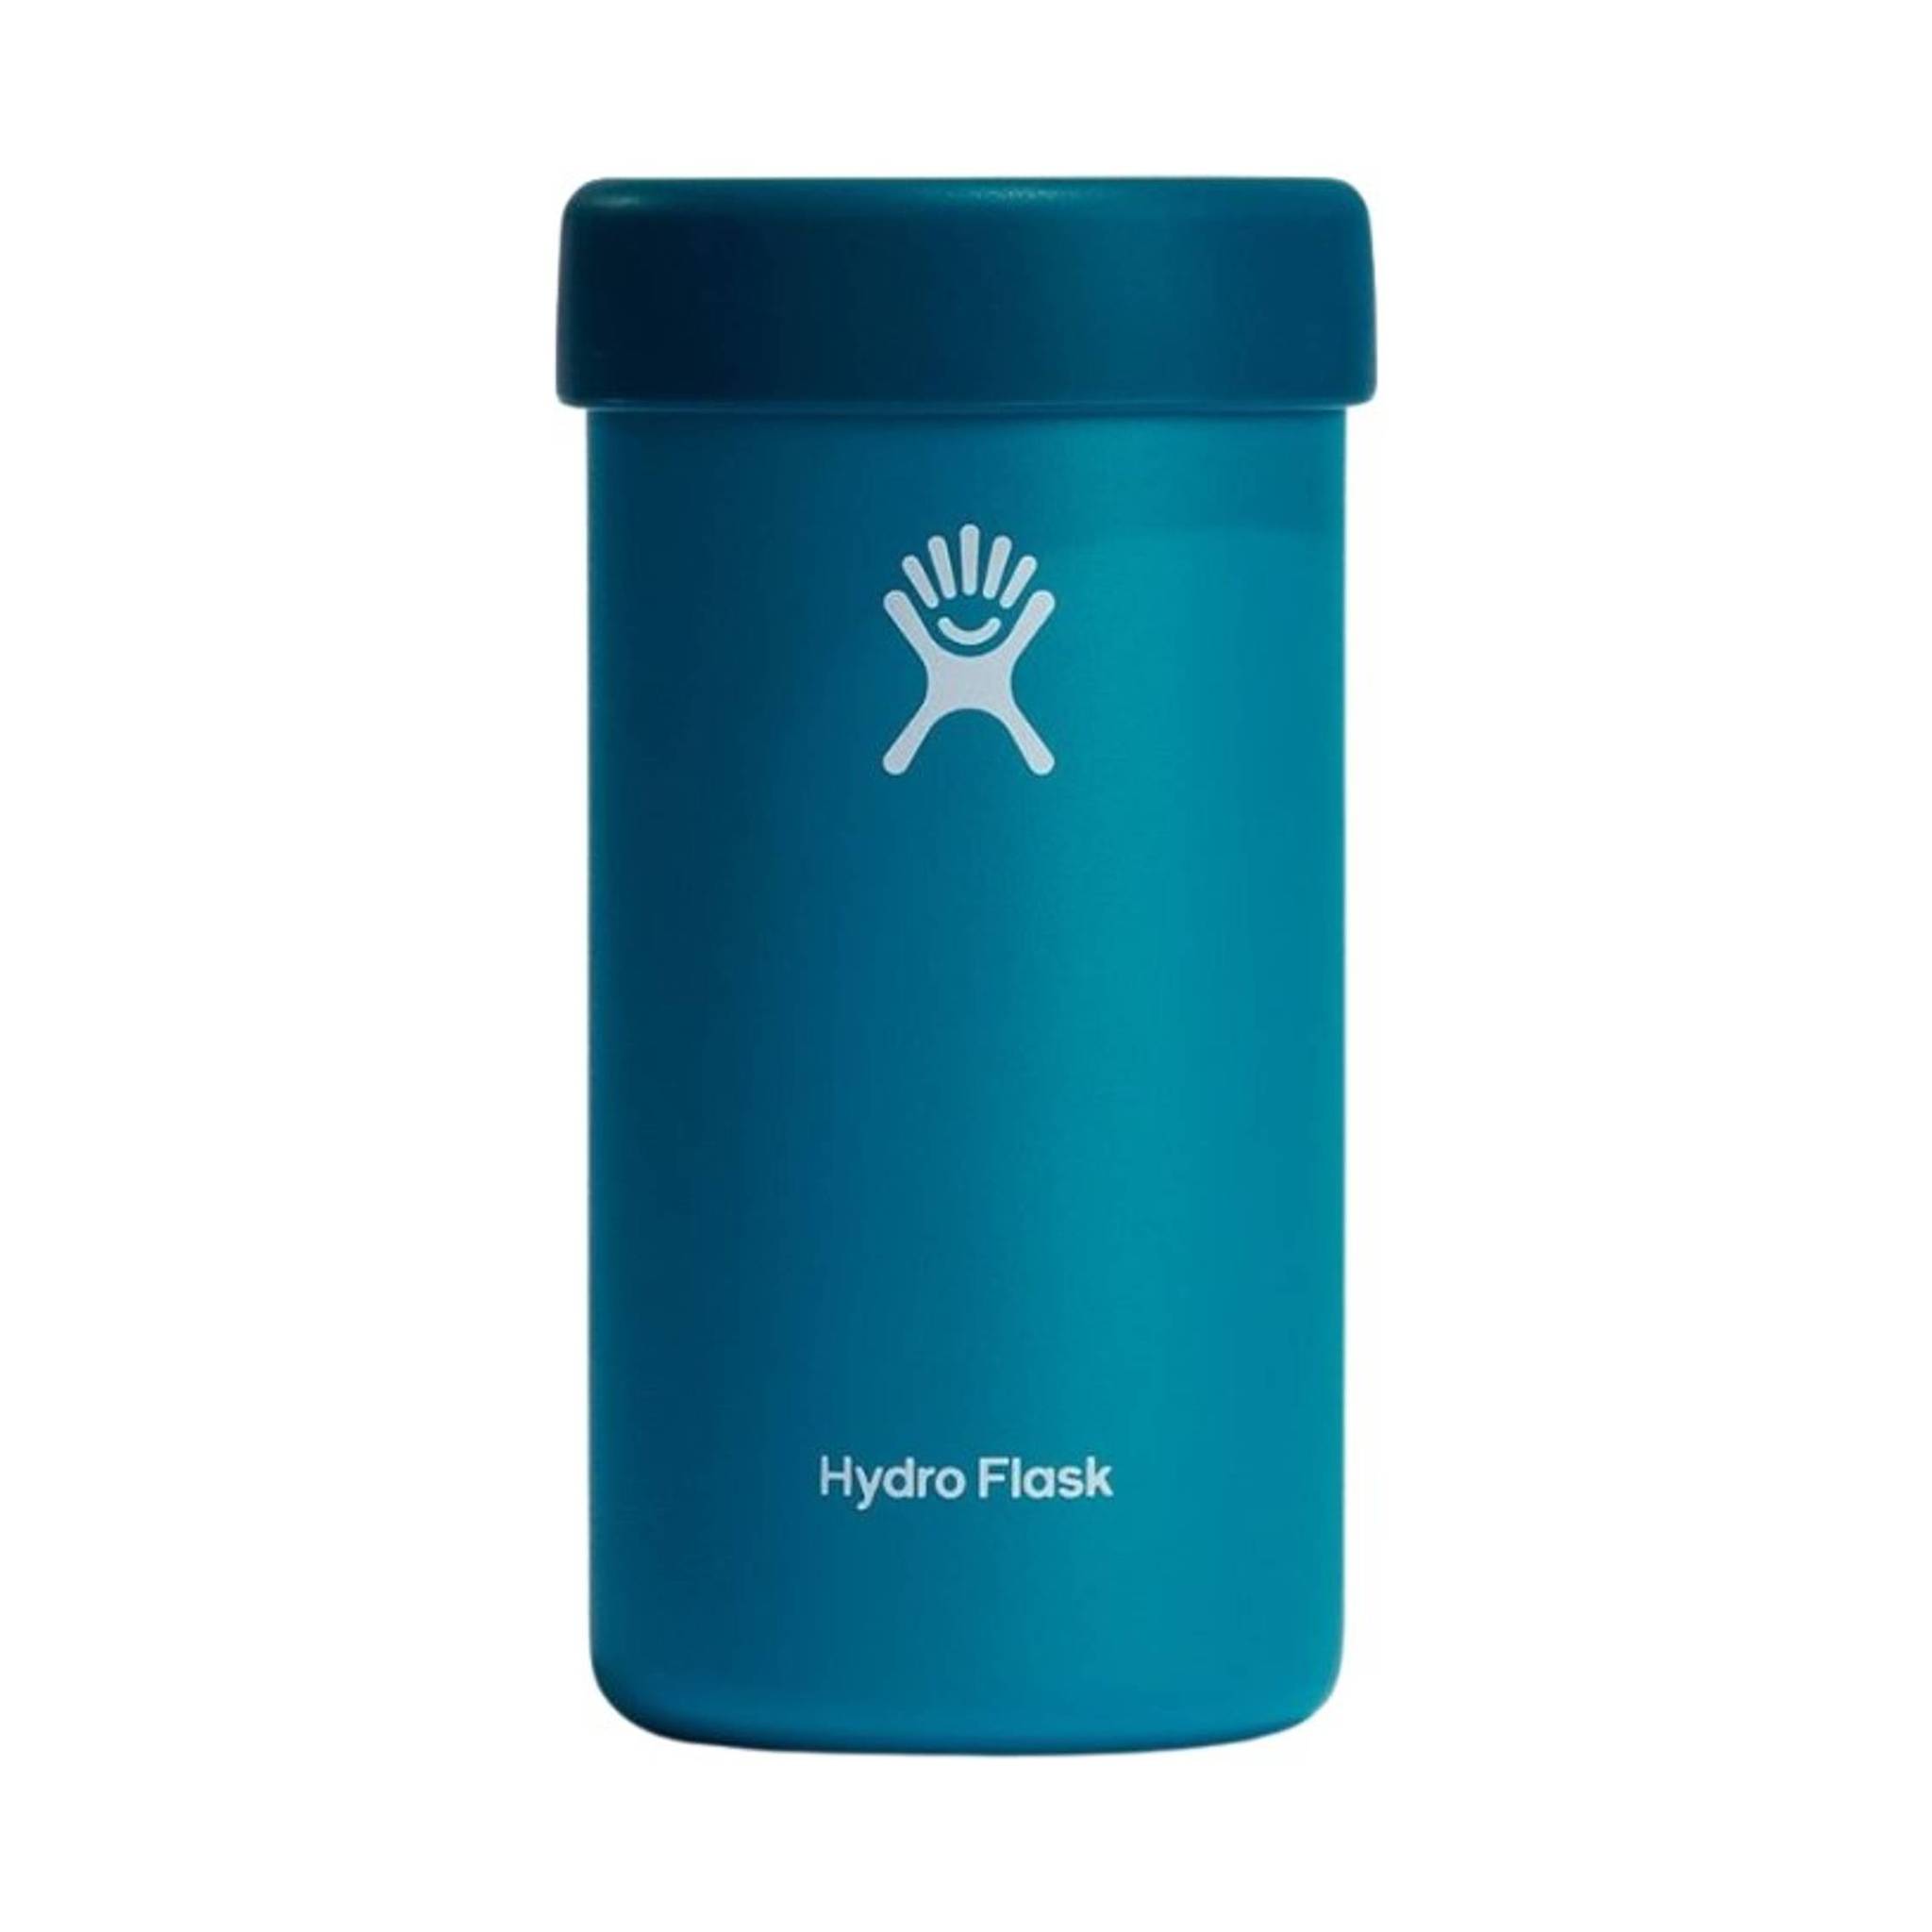 Review of Hydro Flask Cooler Cup –